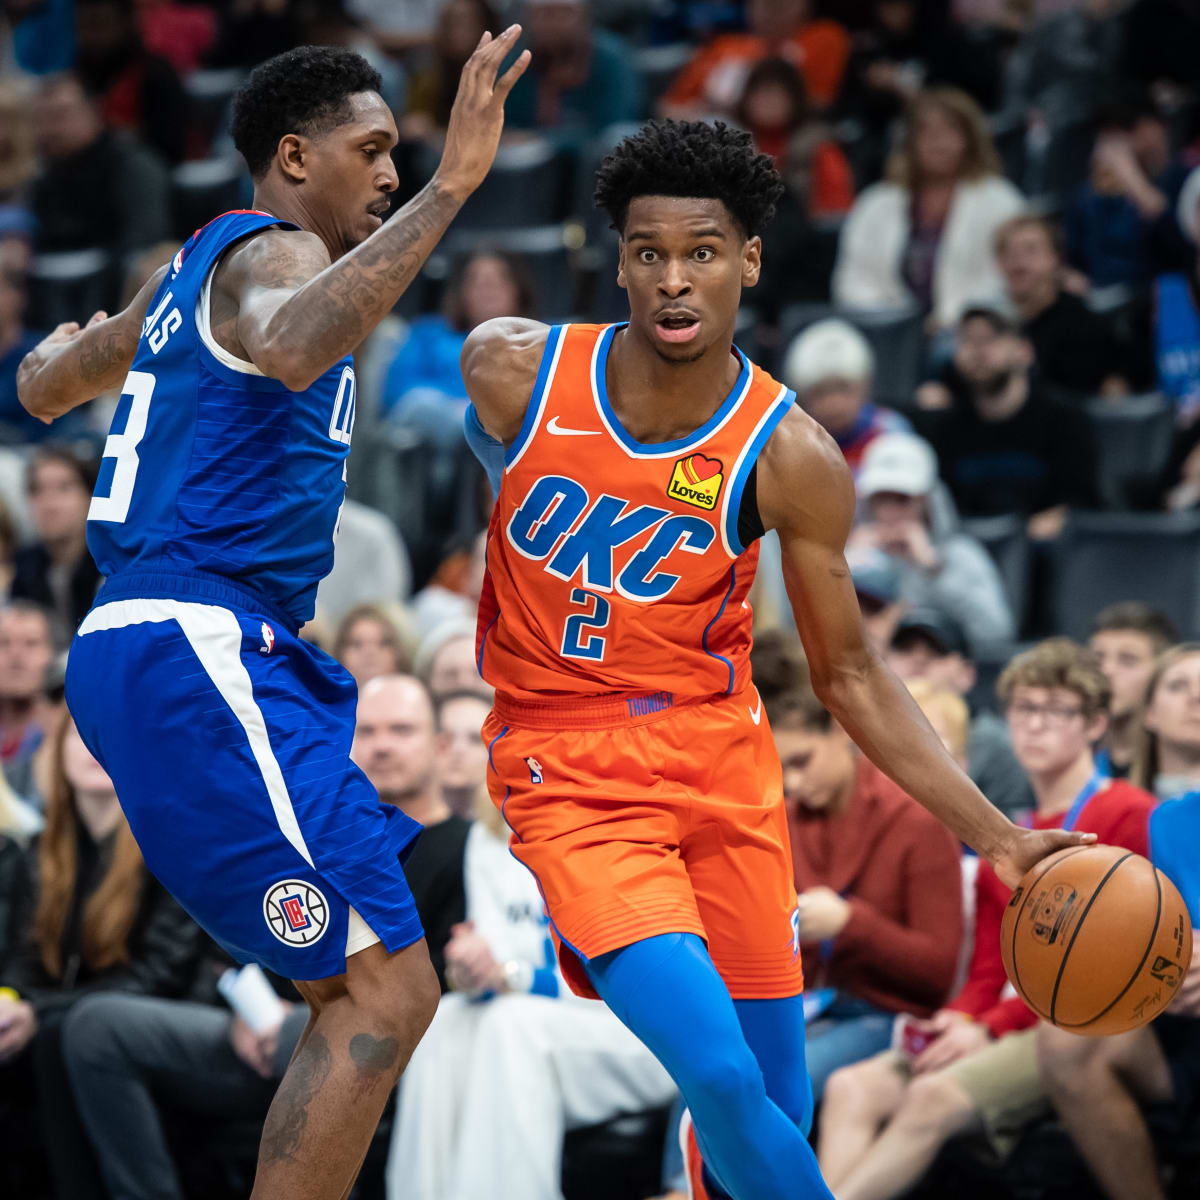 He's a top 5 guard in the league right now” – Shai Gilgeous